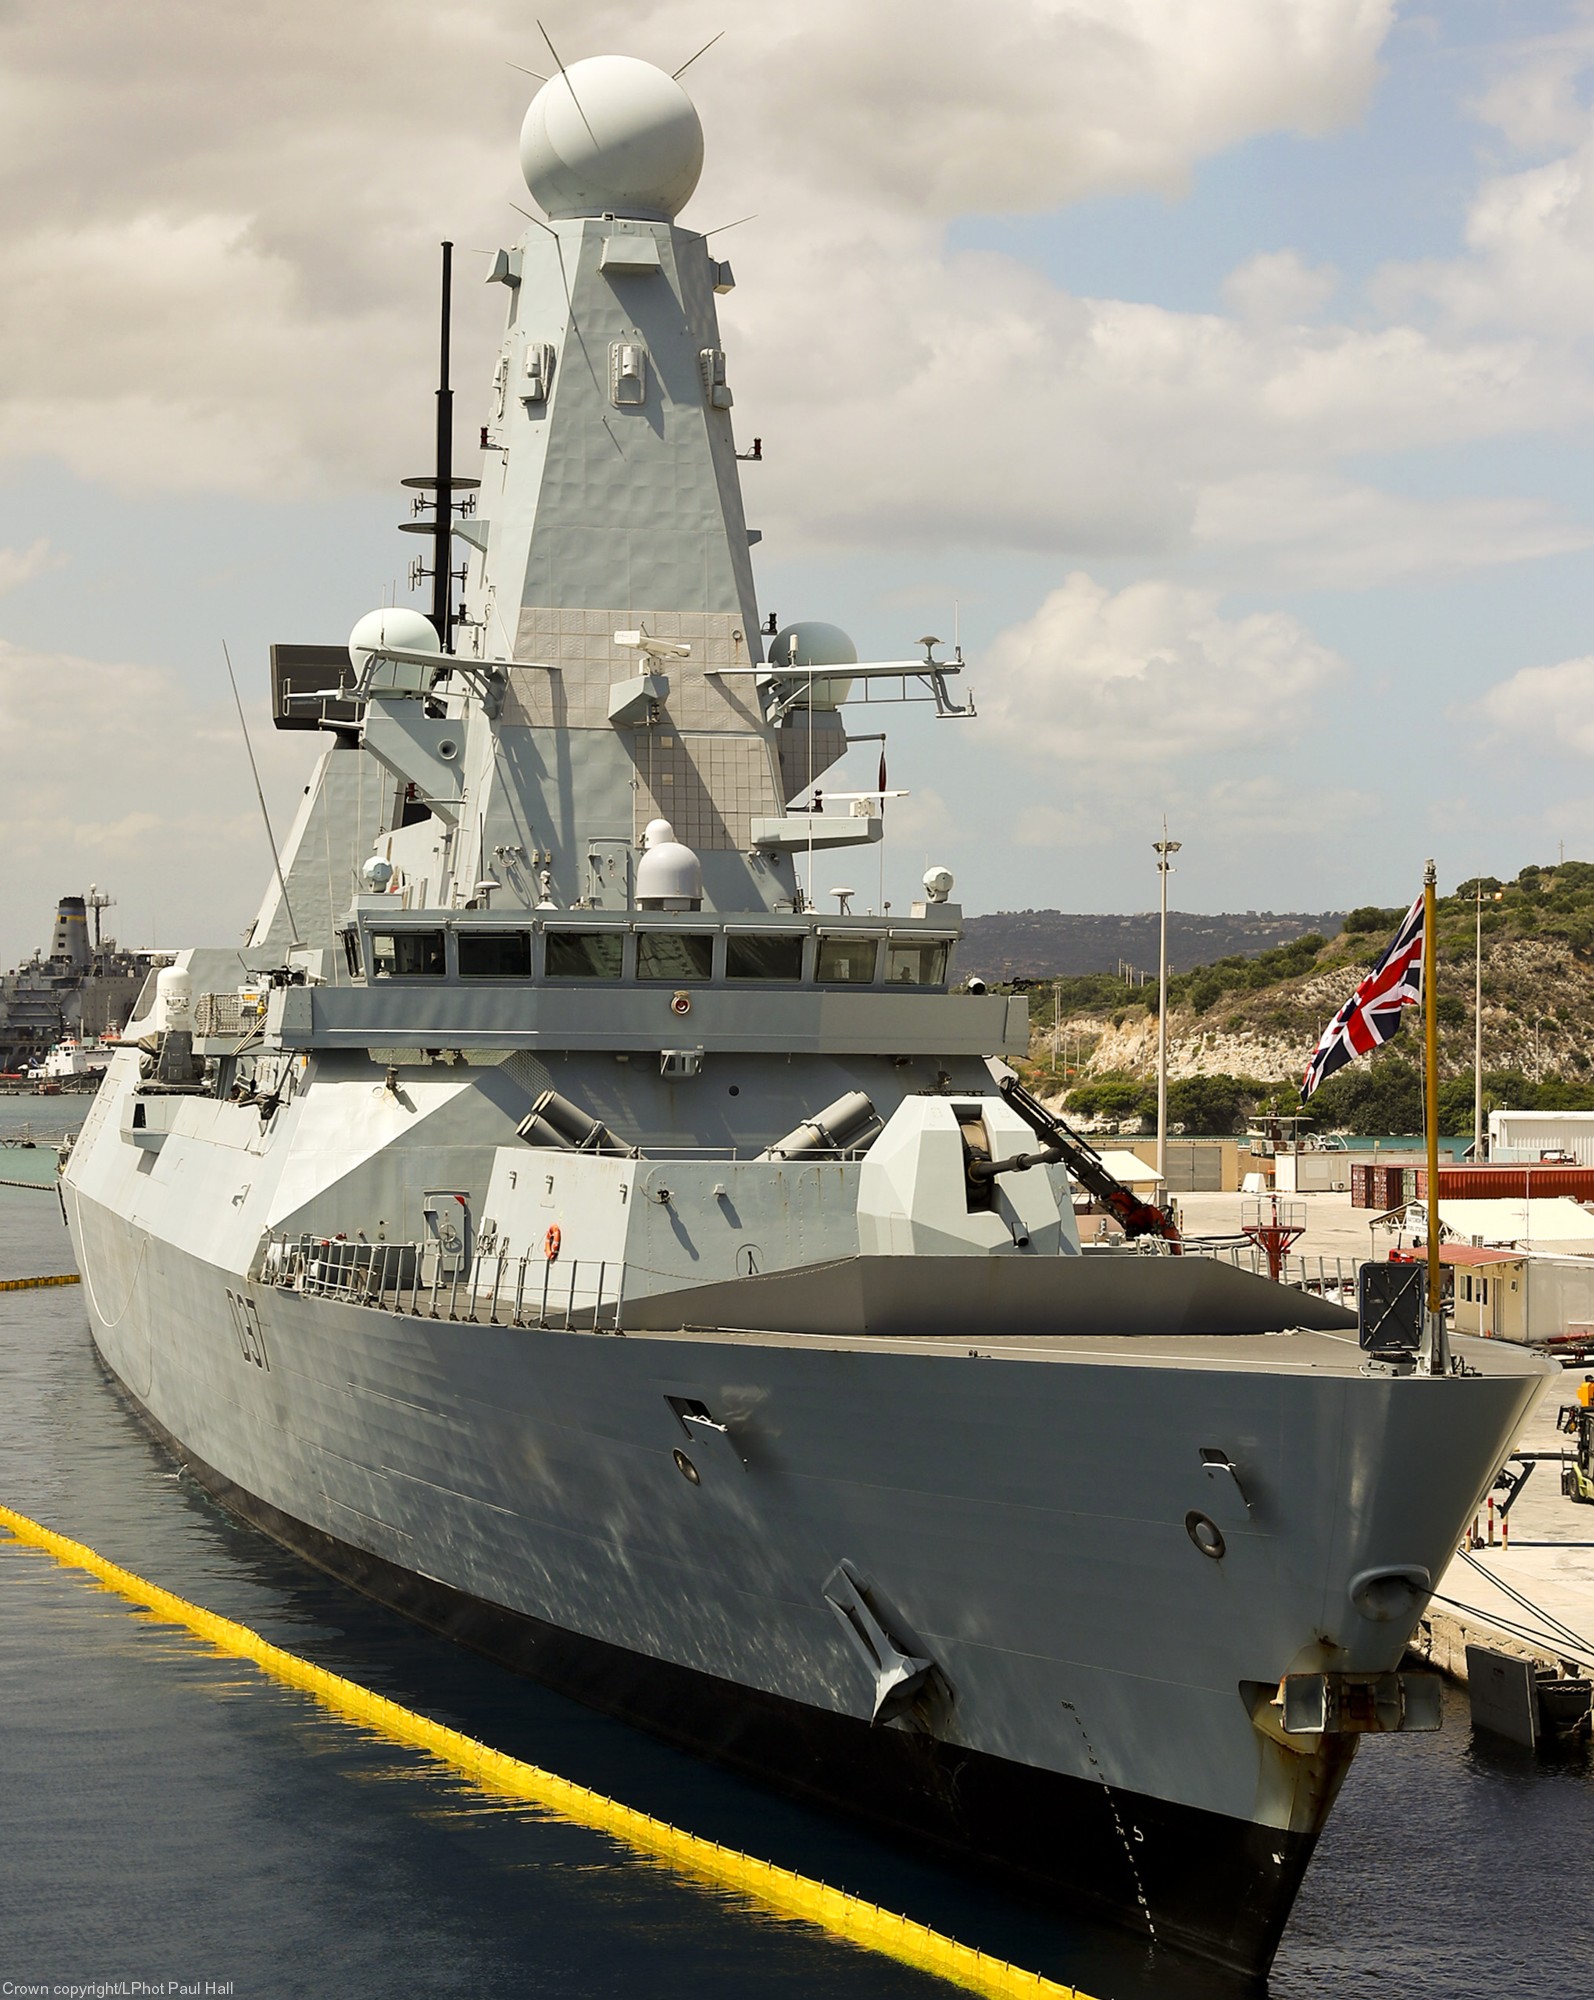 d37 hms duncan d-37 type 45 daring class guided missile destroyer ddg royal navy sea viper 31a